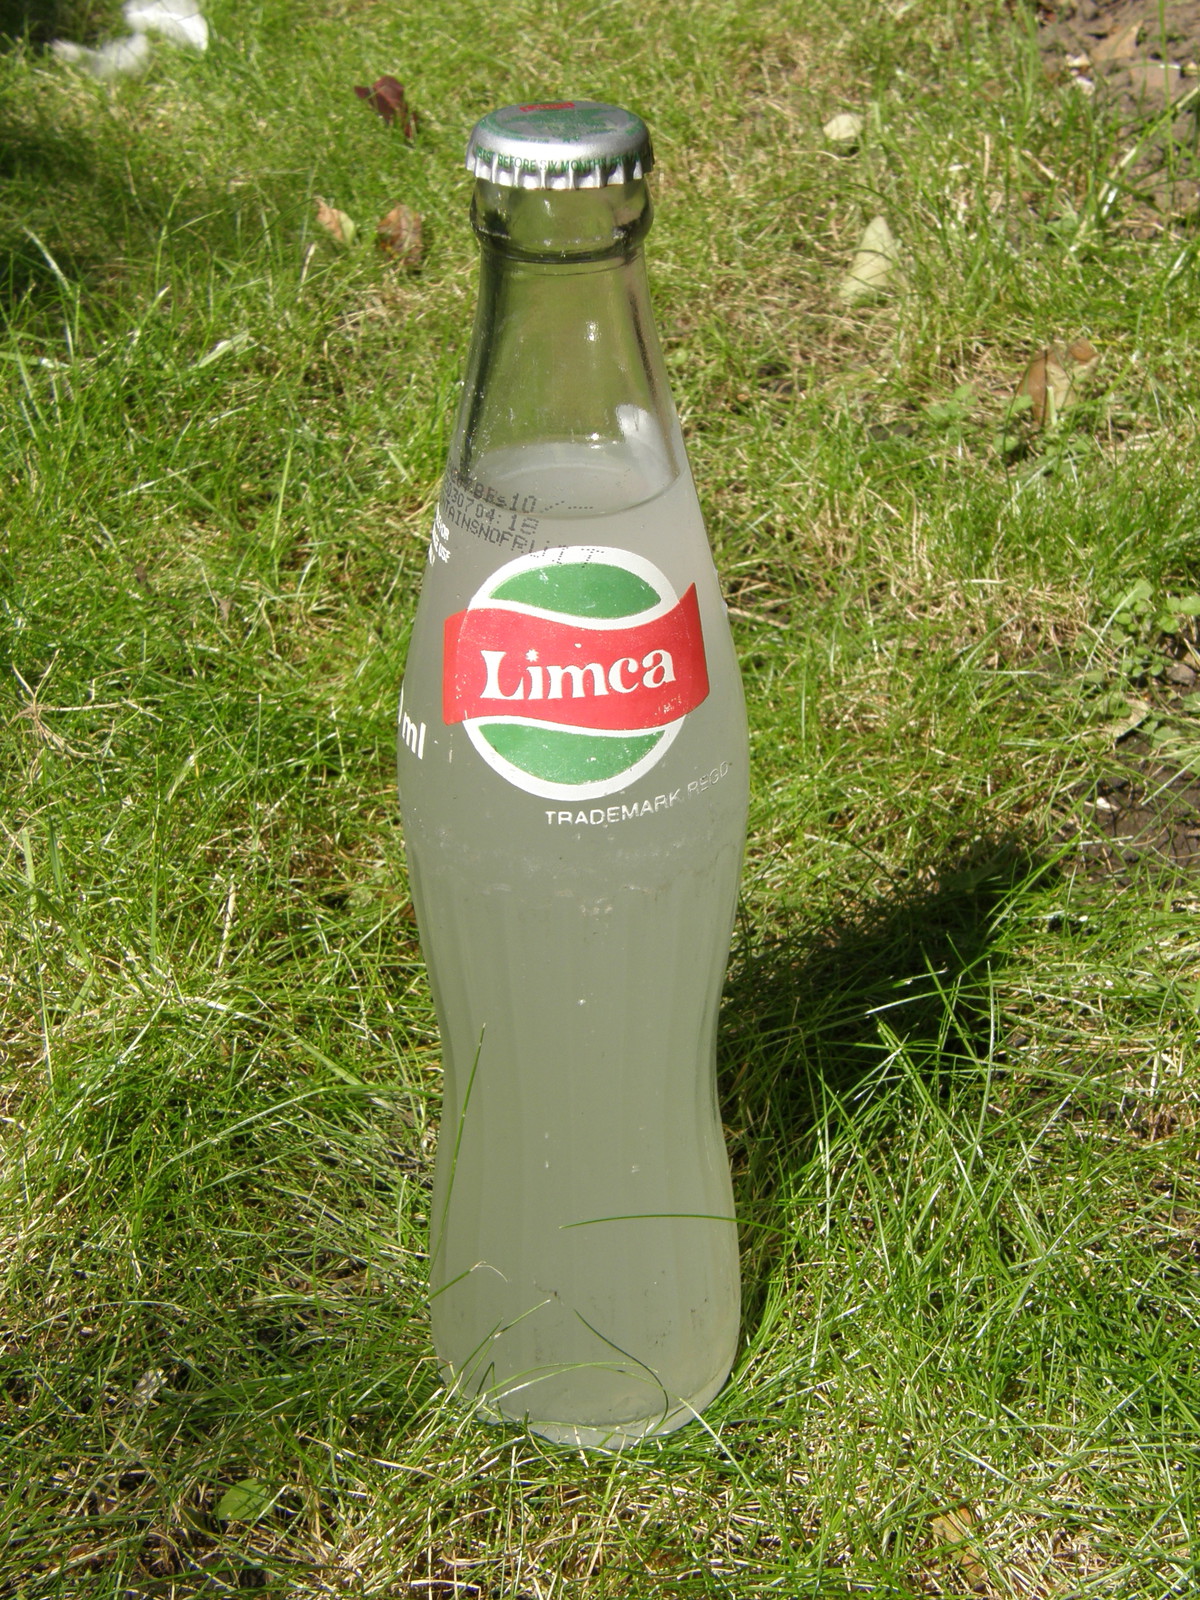 A bottle of Limca